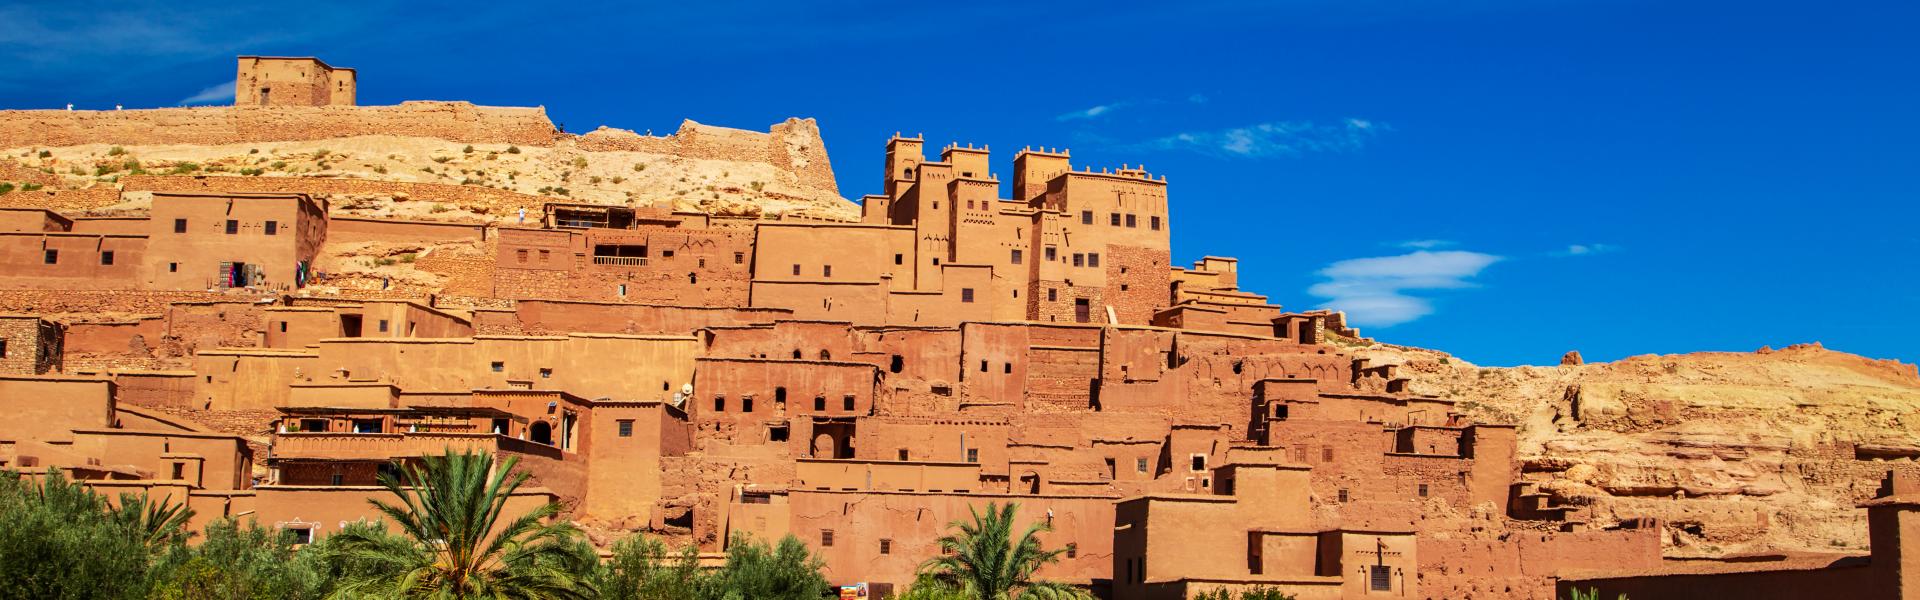 Find the perfect vacation home in Morocco - Casamundo